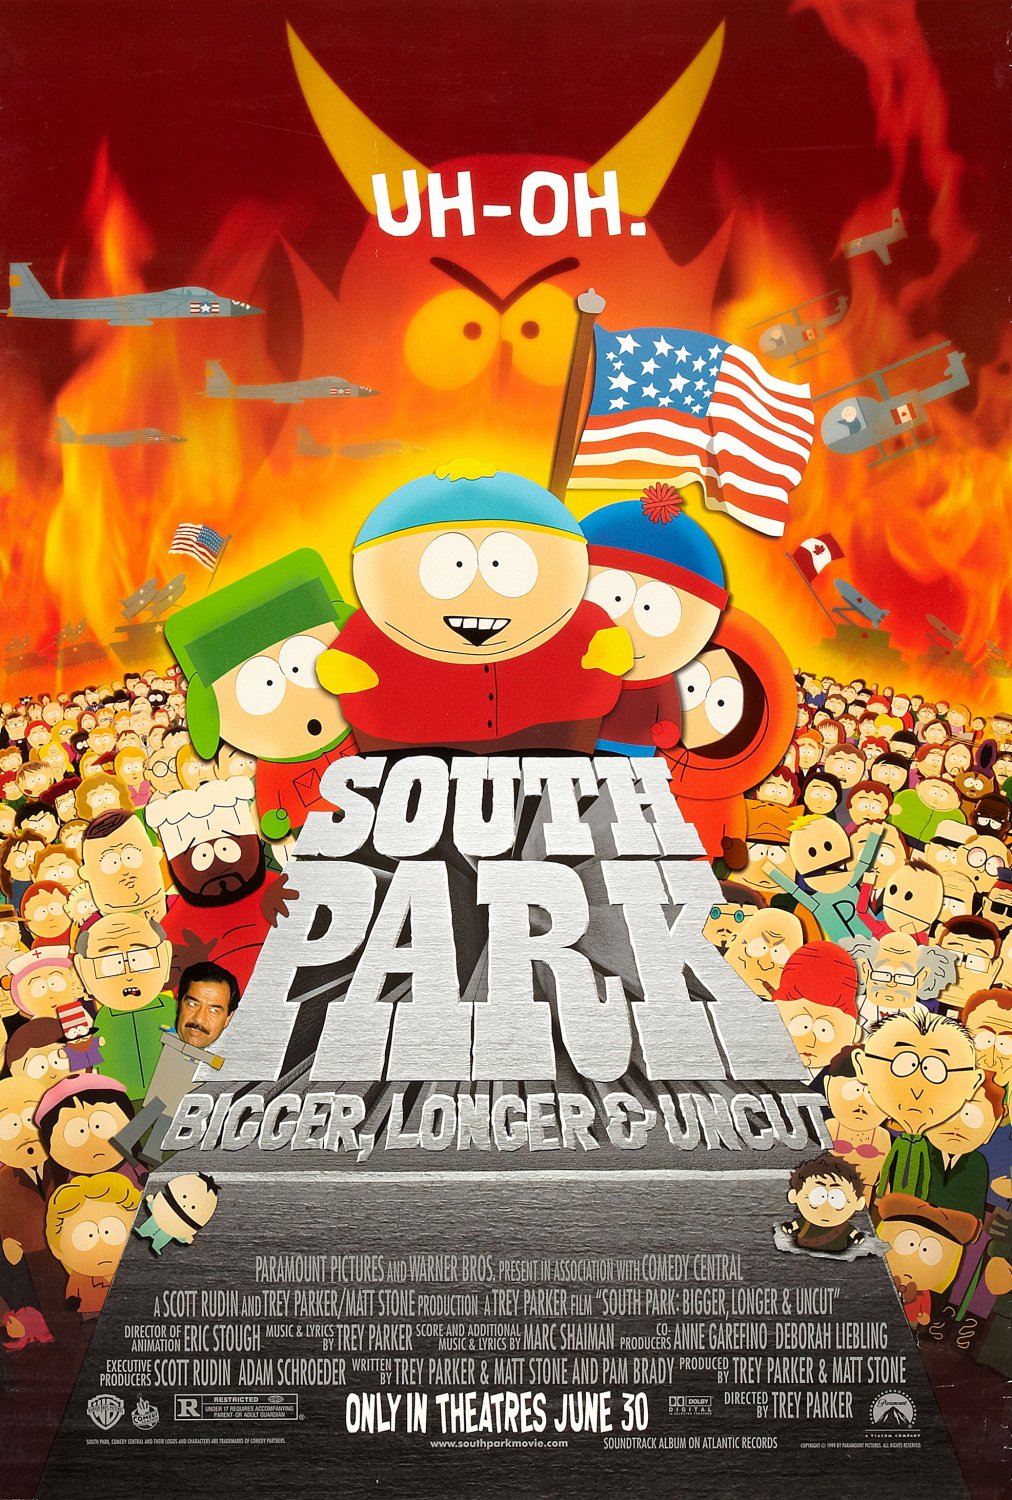 Extra Large Movie Poster Image for South Park: Bigger, Longer, & Uncut 